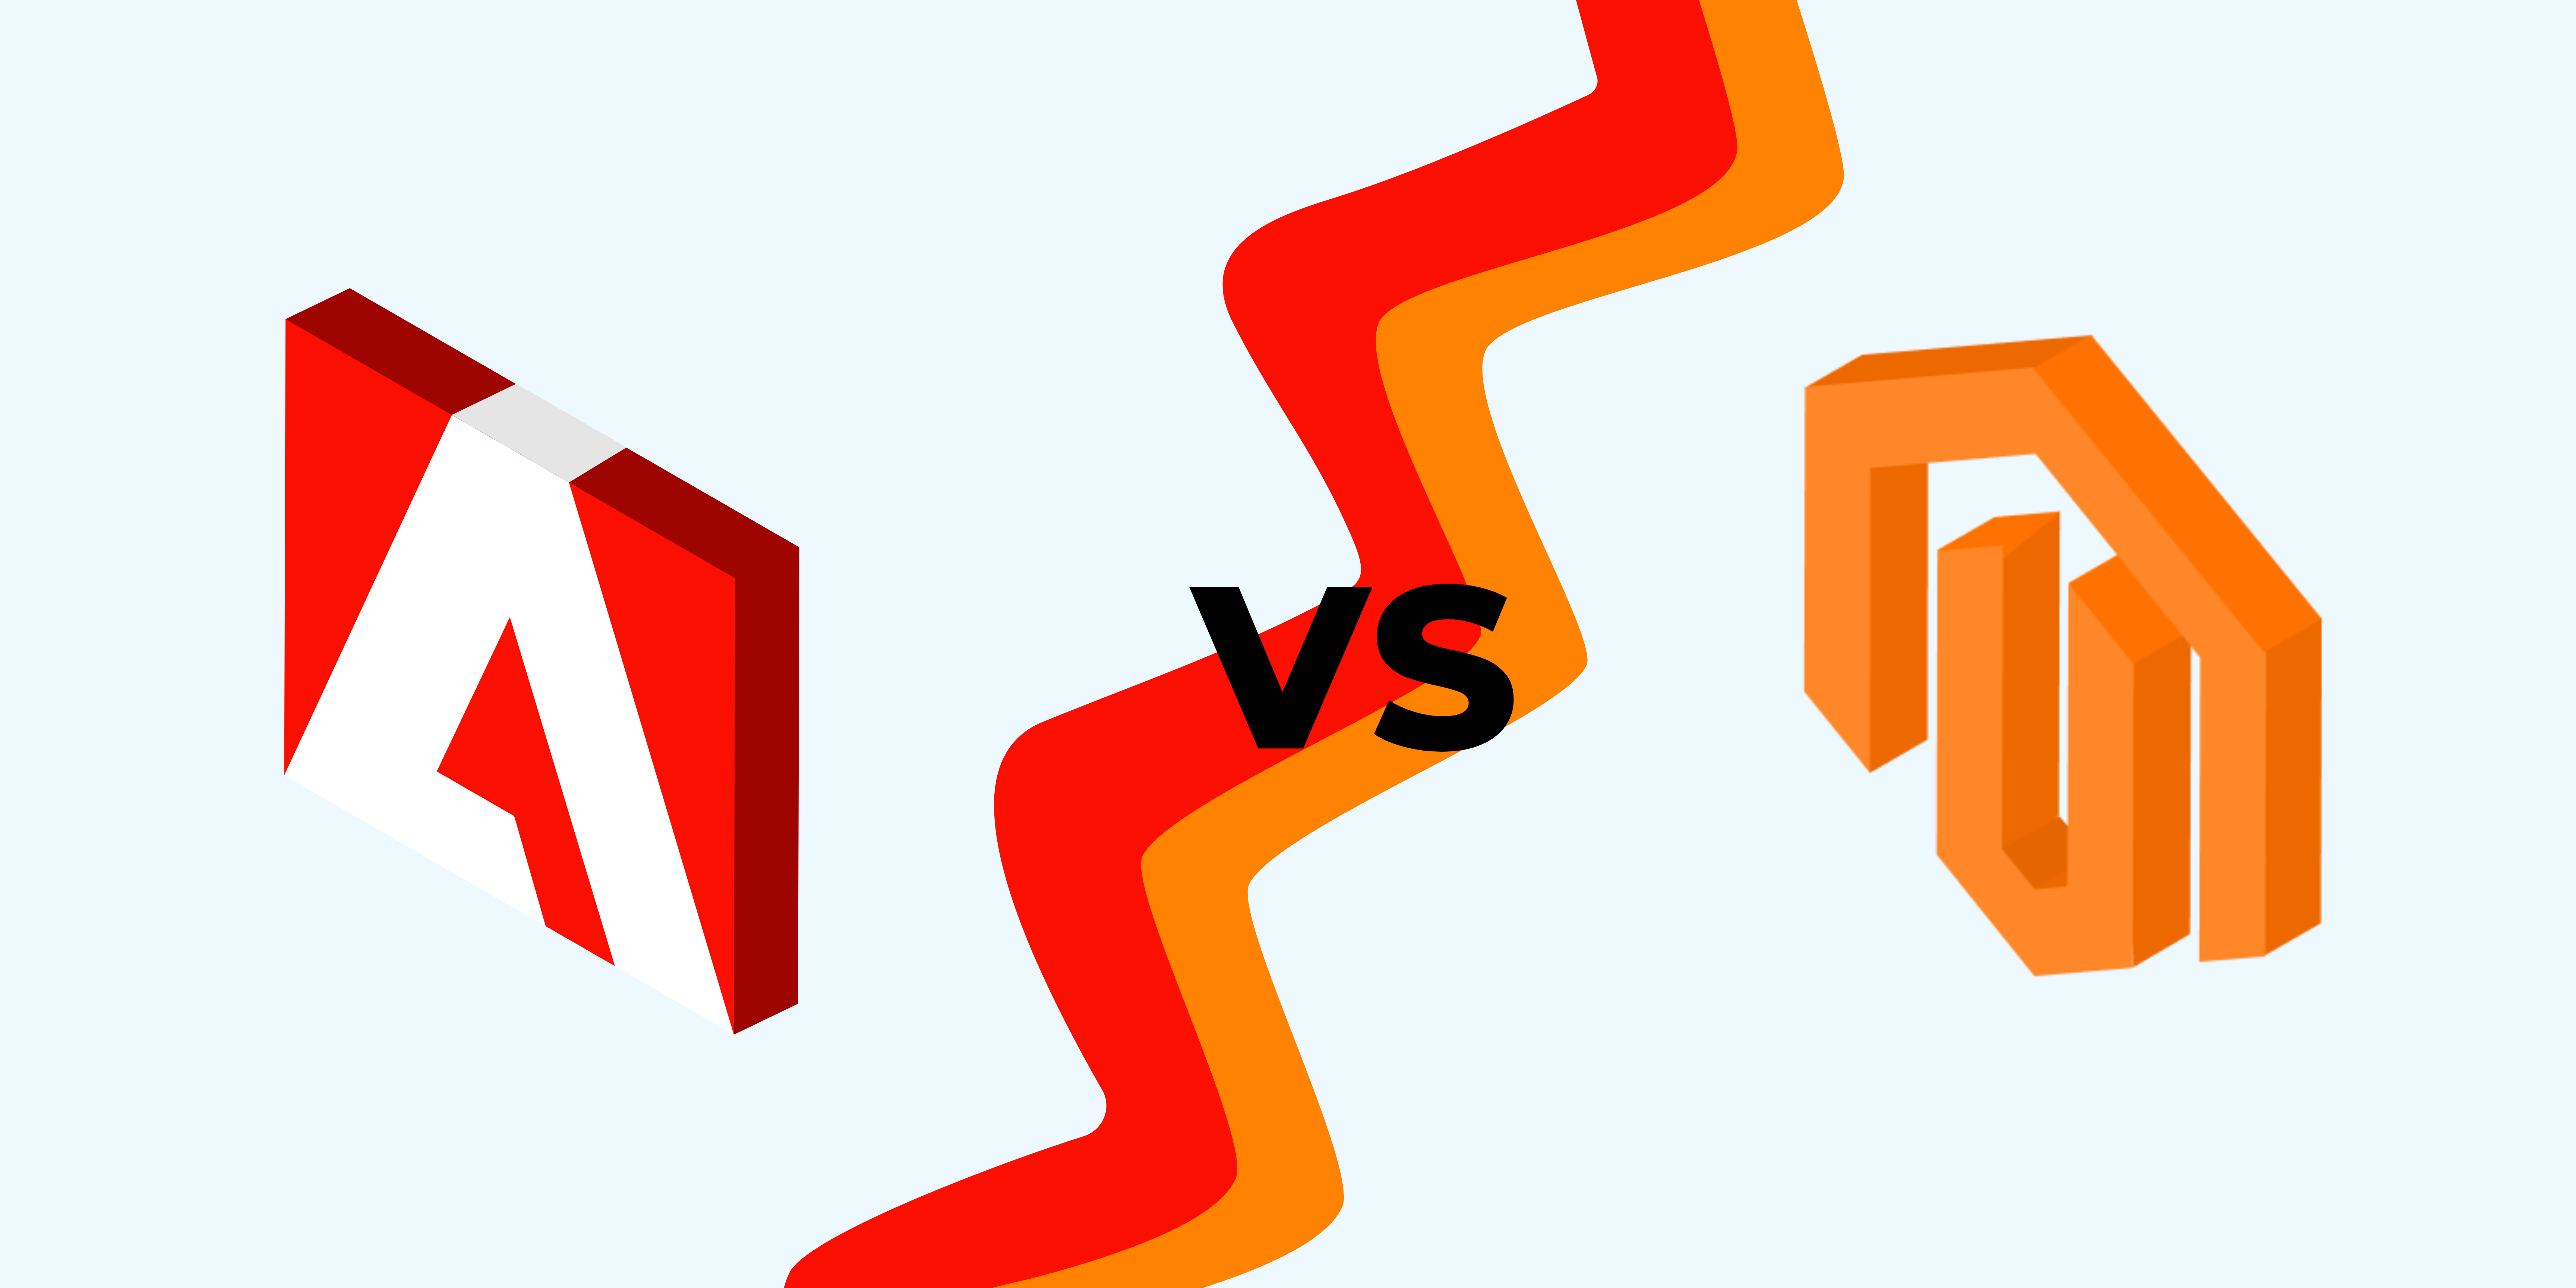 Adobe Commerce or Magento Open Source: Which one is better?